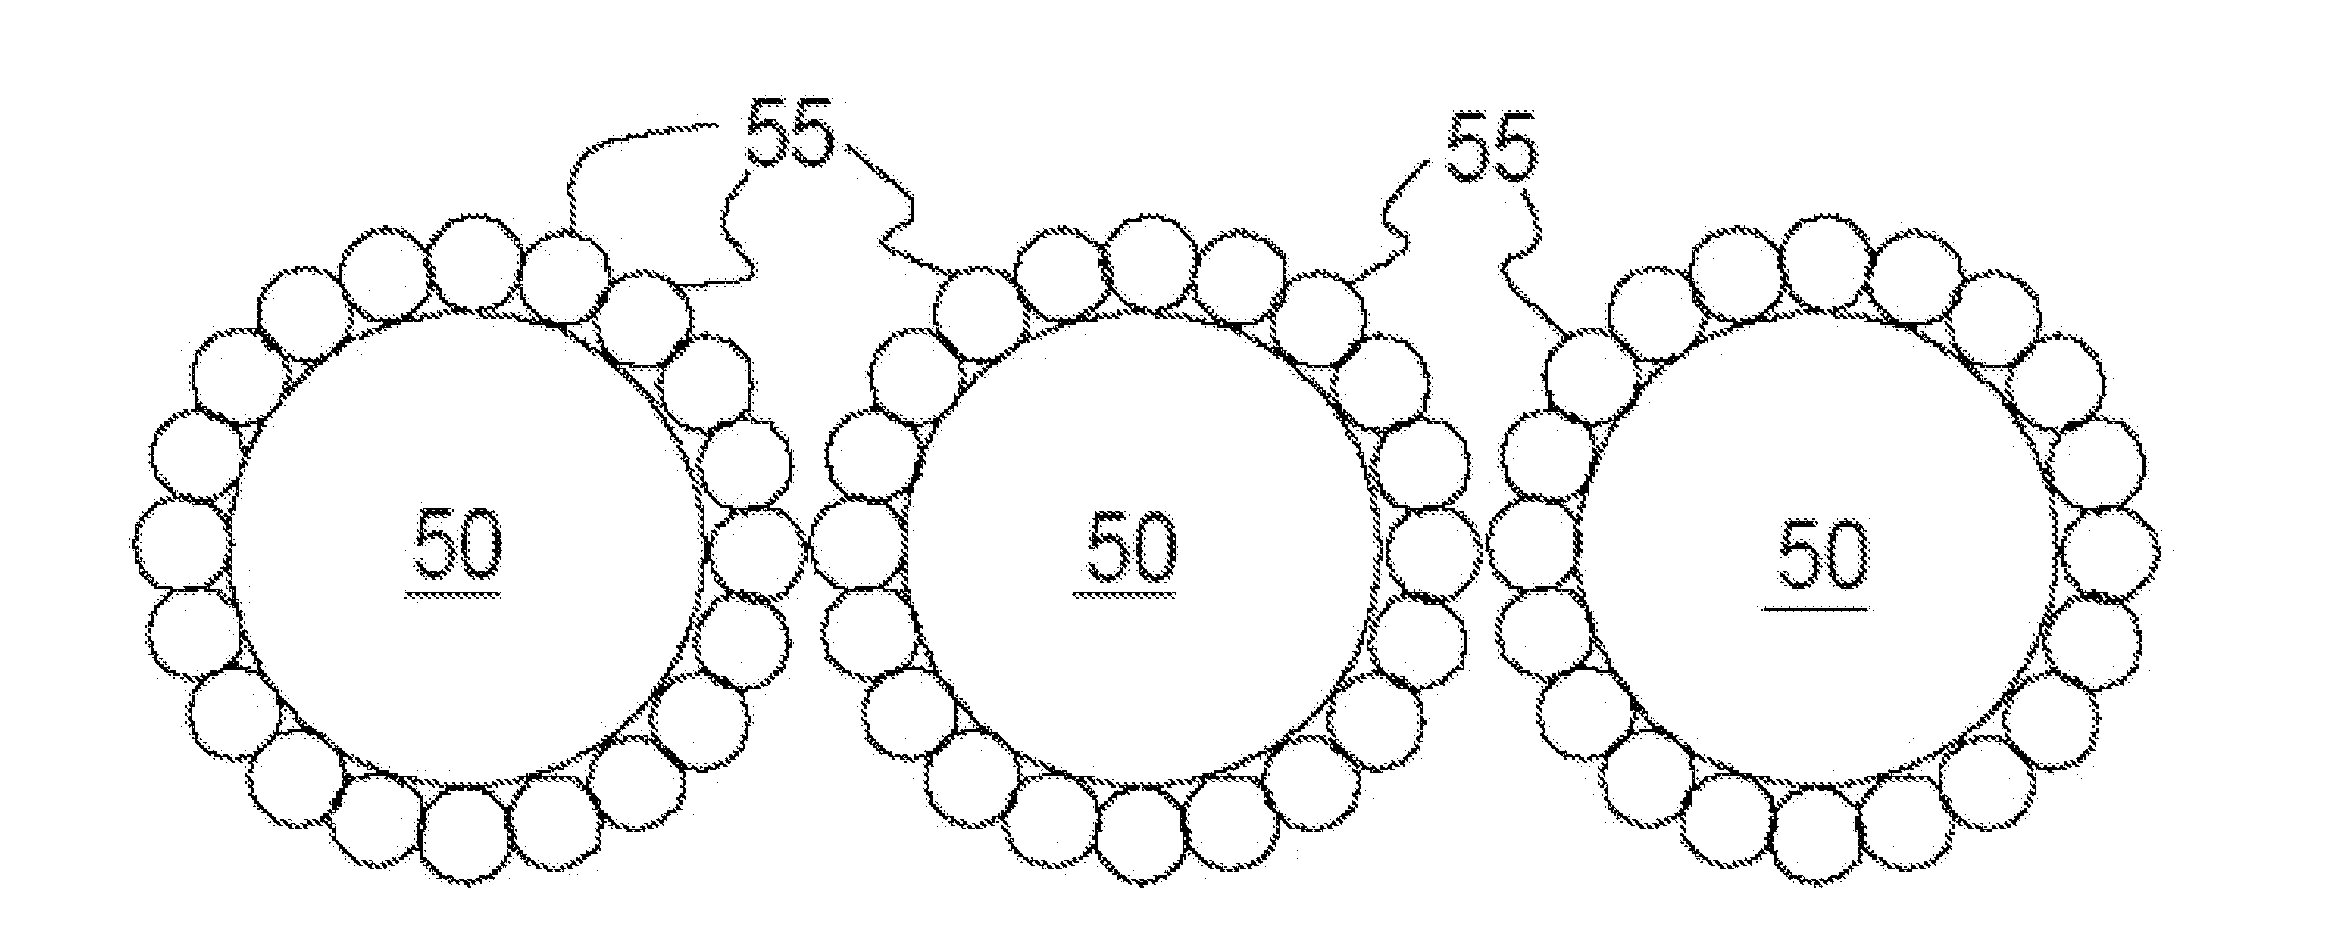 Method of producing uniform blends of NANO and micron powders